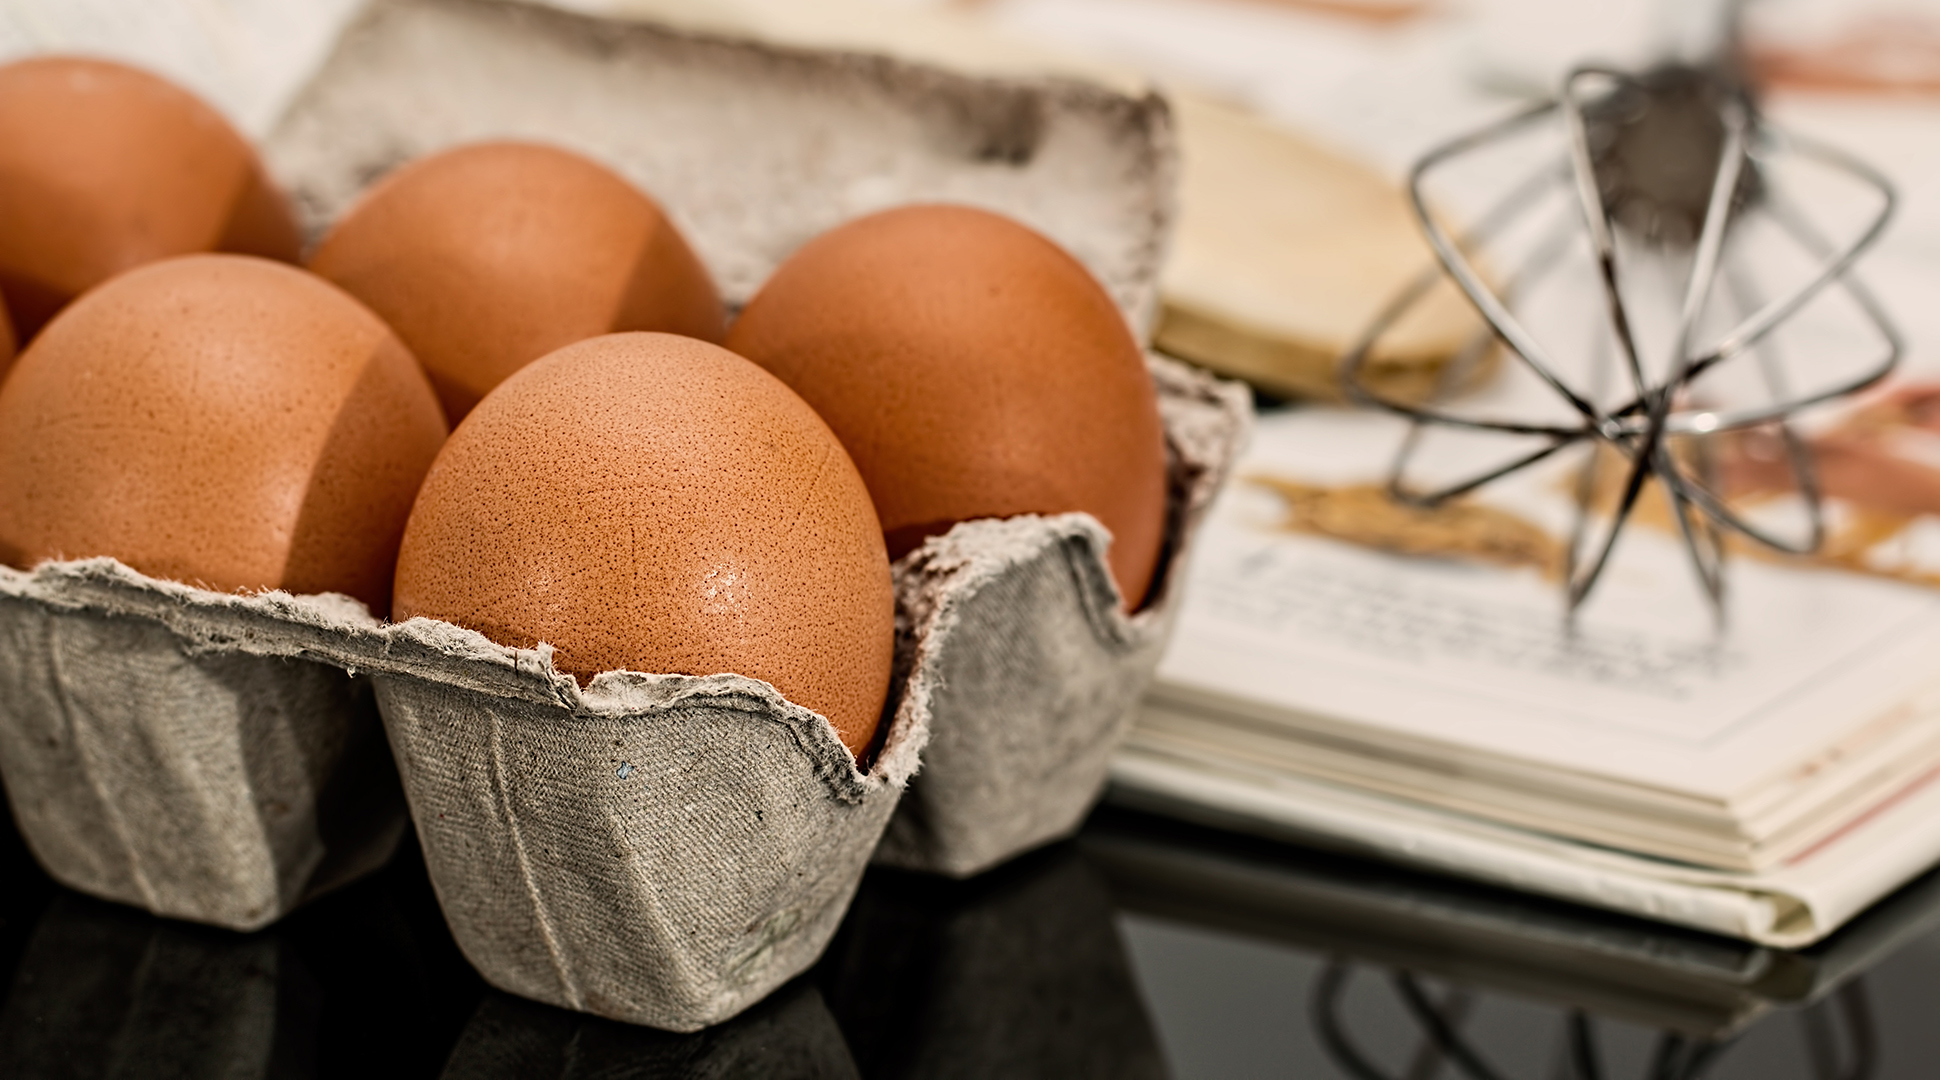 Are eggs healthful or not?